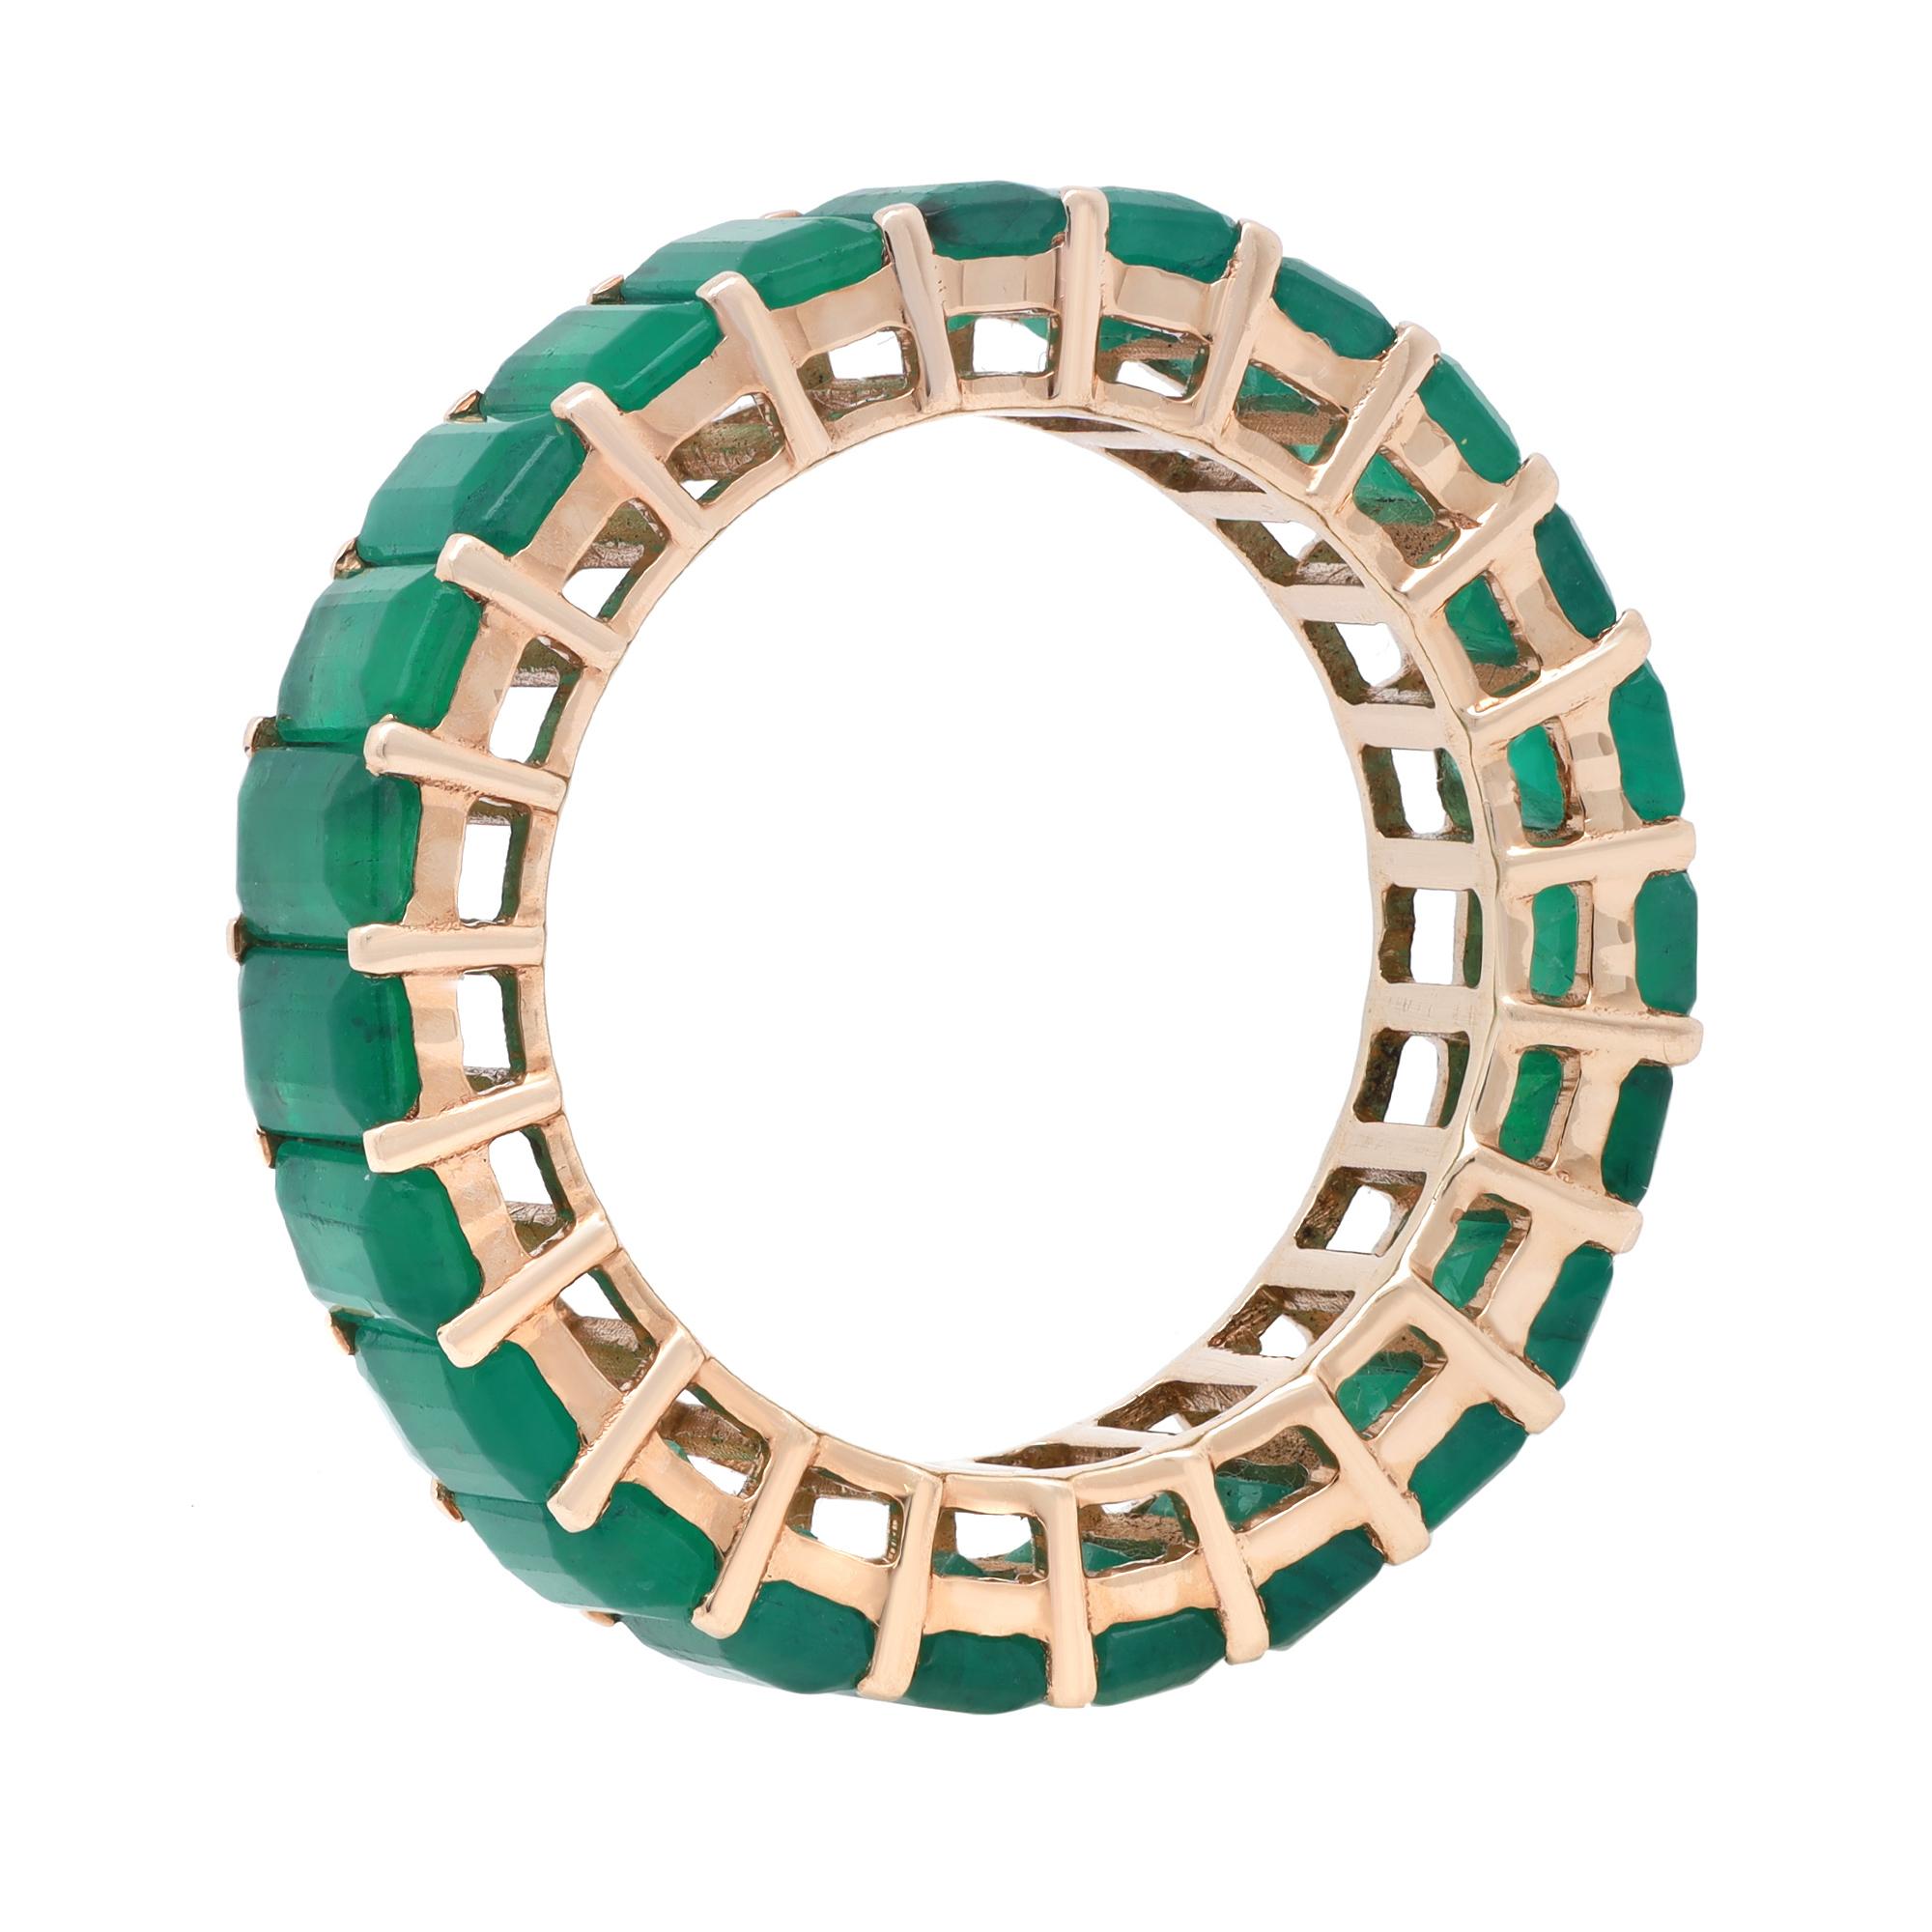 Stay classy with this stunning green Emerald eternity band ring. This exquisite ring is crafted in fine 14K yellow gold. It features 23 prong set Emerald cut Emeralds which weight 6.94 carats. Stackable and easy to mix and match. Ring size: 6.75.